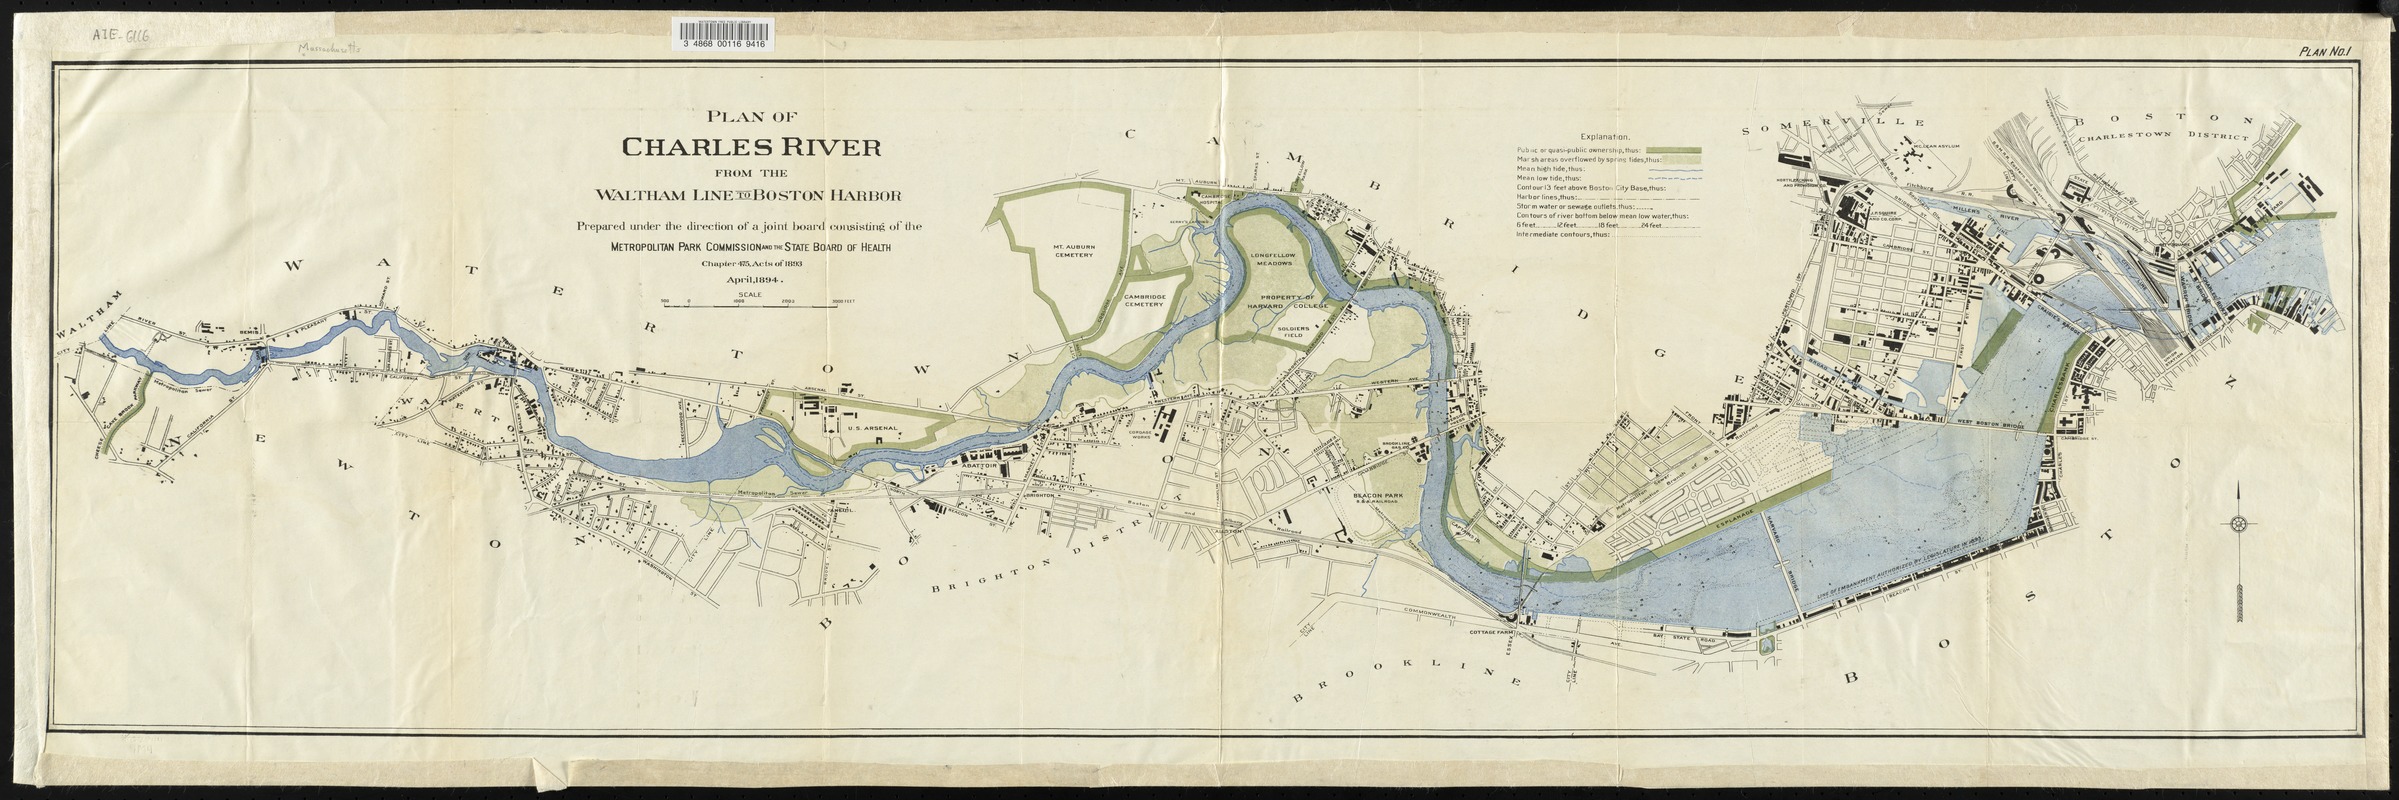 Plan of Charles River from the Waltham line to Boston Harbor